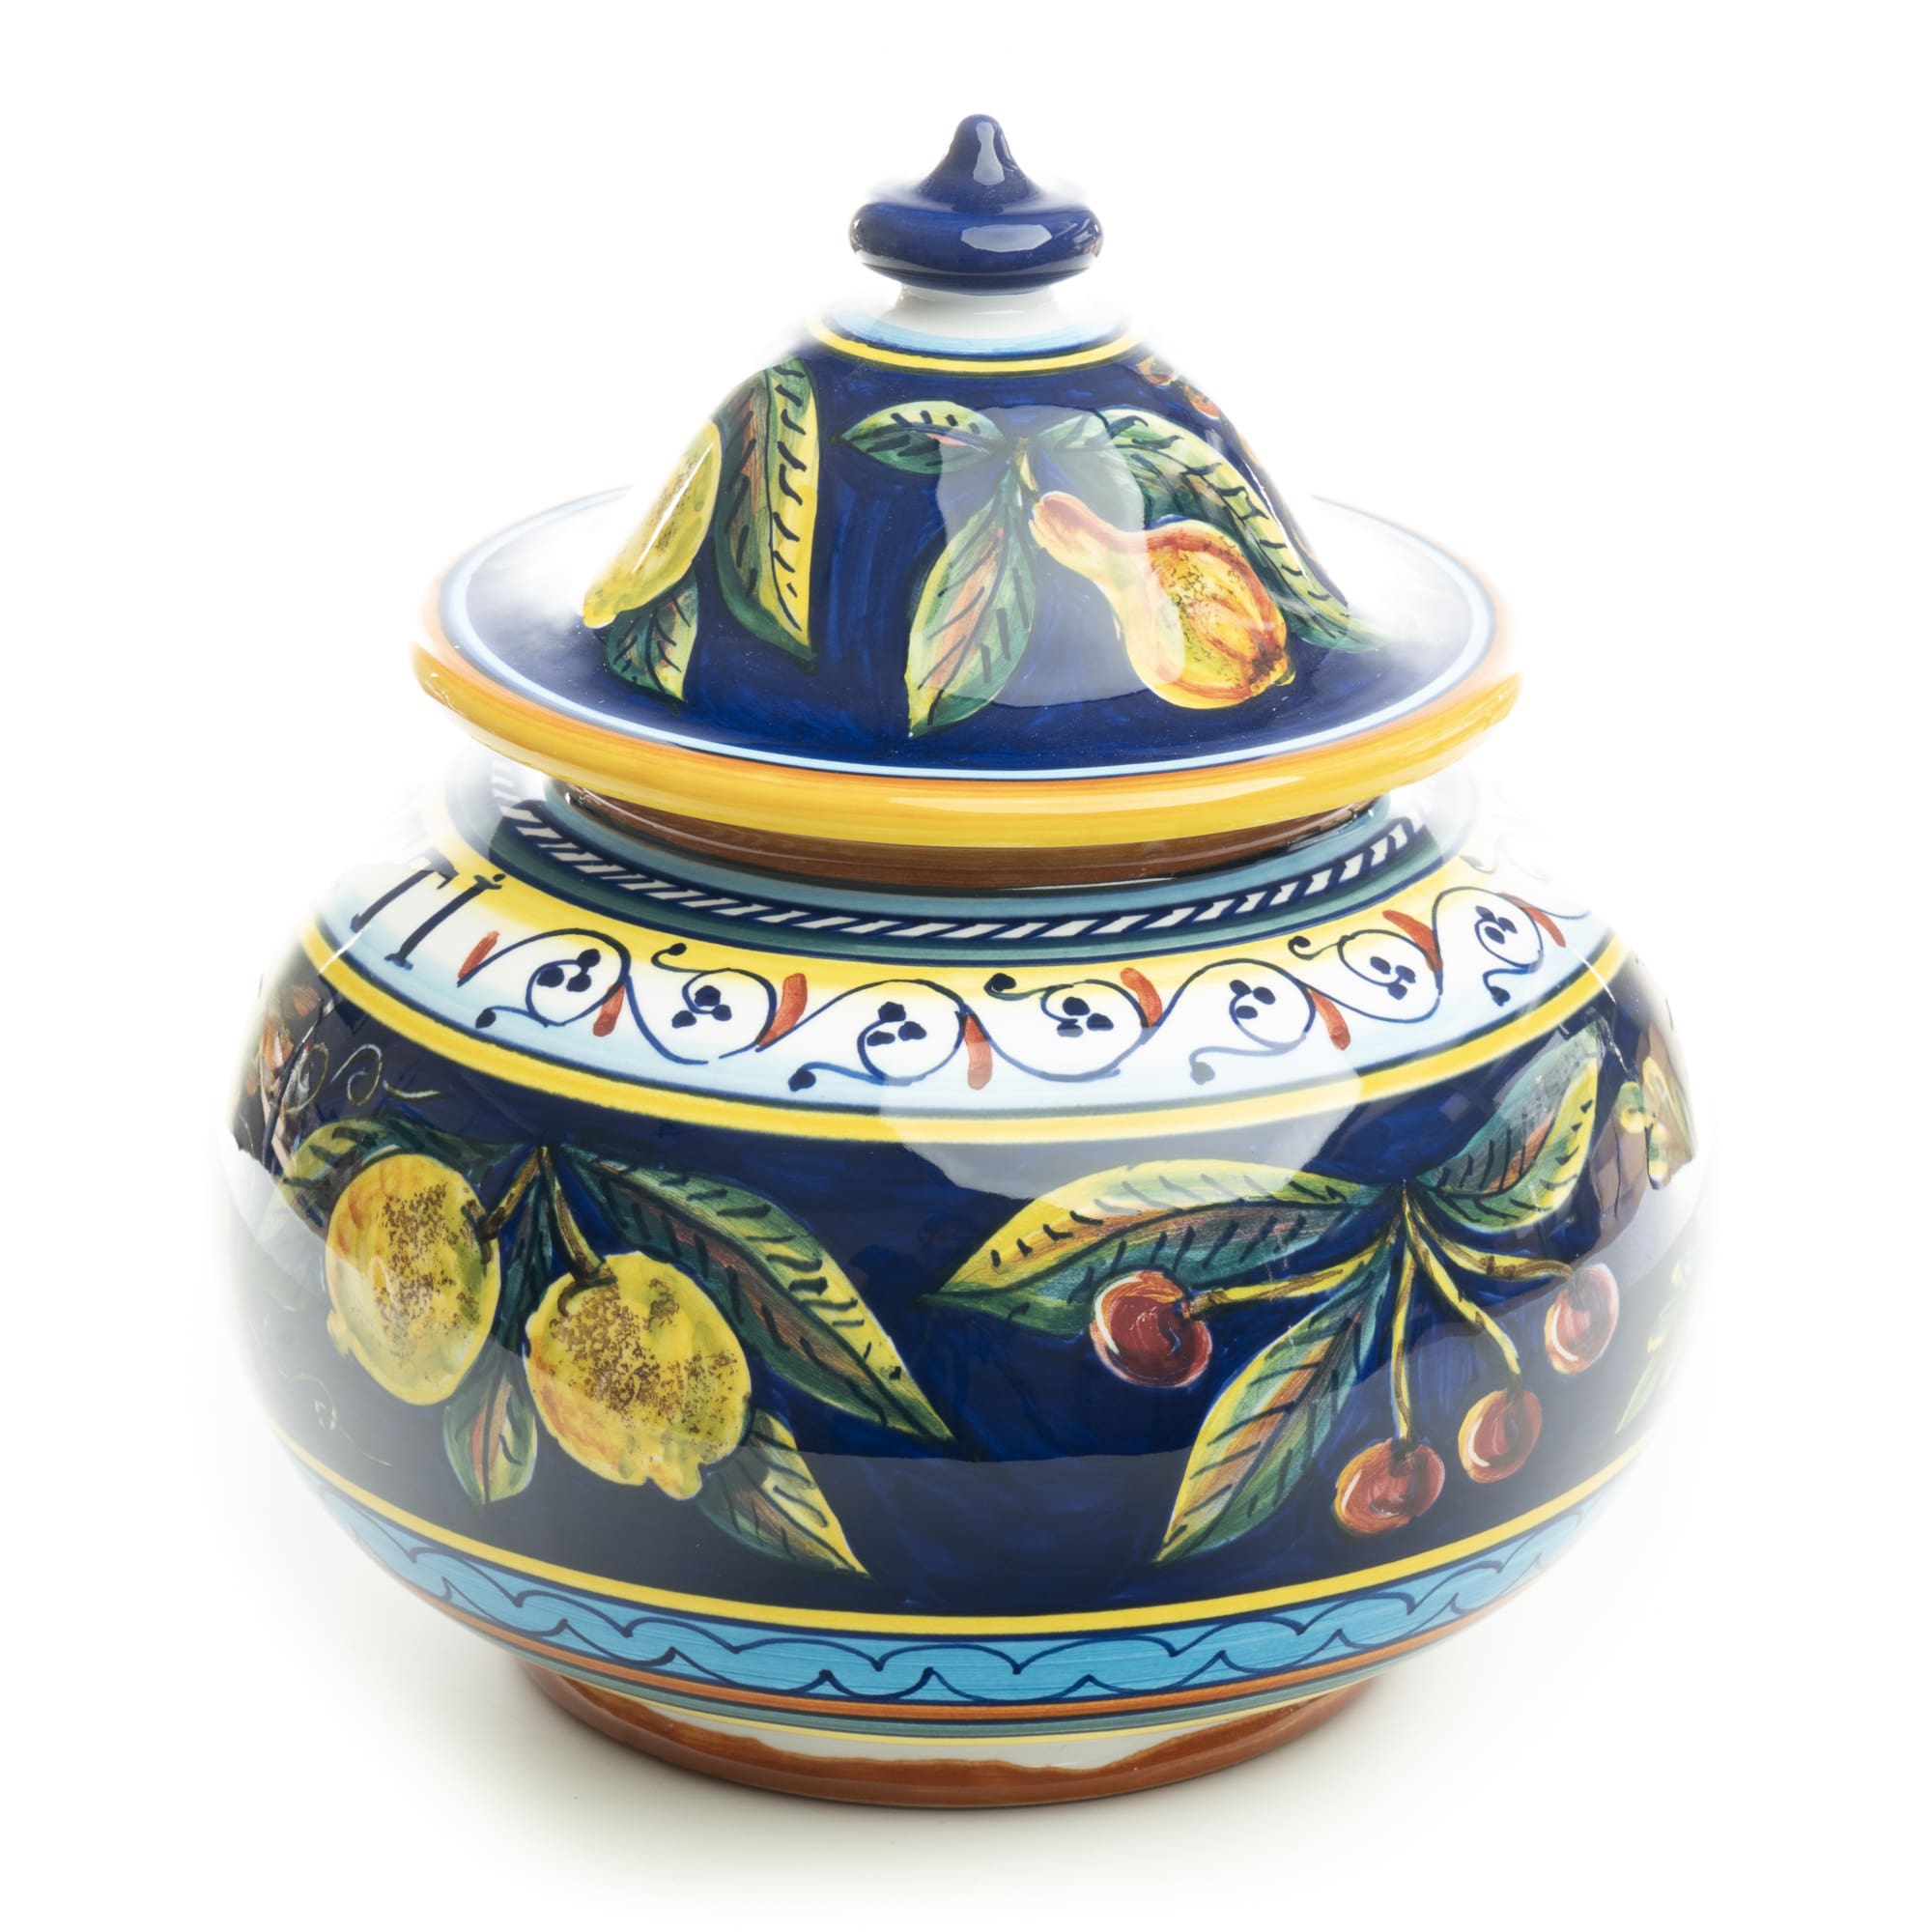 Collectible Majolica Round Biscotti Jar B-57, ceramics, pottery, italian design, majolica, handmade, handcrafted, handpainted, home decor, kitchen art, home goods, deruta, majolica, Artisan, treasures, traditional art, modern art, gift ideas, style, SF, shop small business, artists, shop online, landmark store, legacy, one of a kind, limited edition, gift guide, gift shop, retail shop, decorations, shopping, italy, home staging, home decorating, home interiors